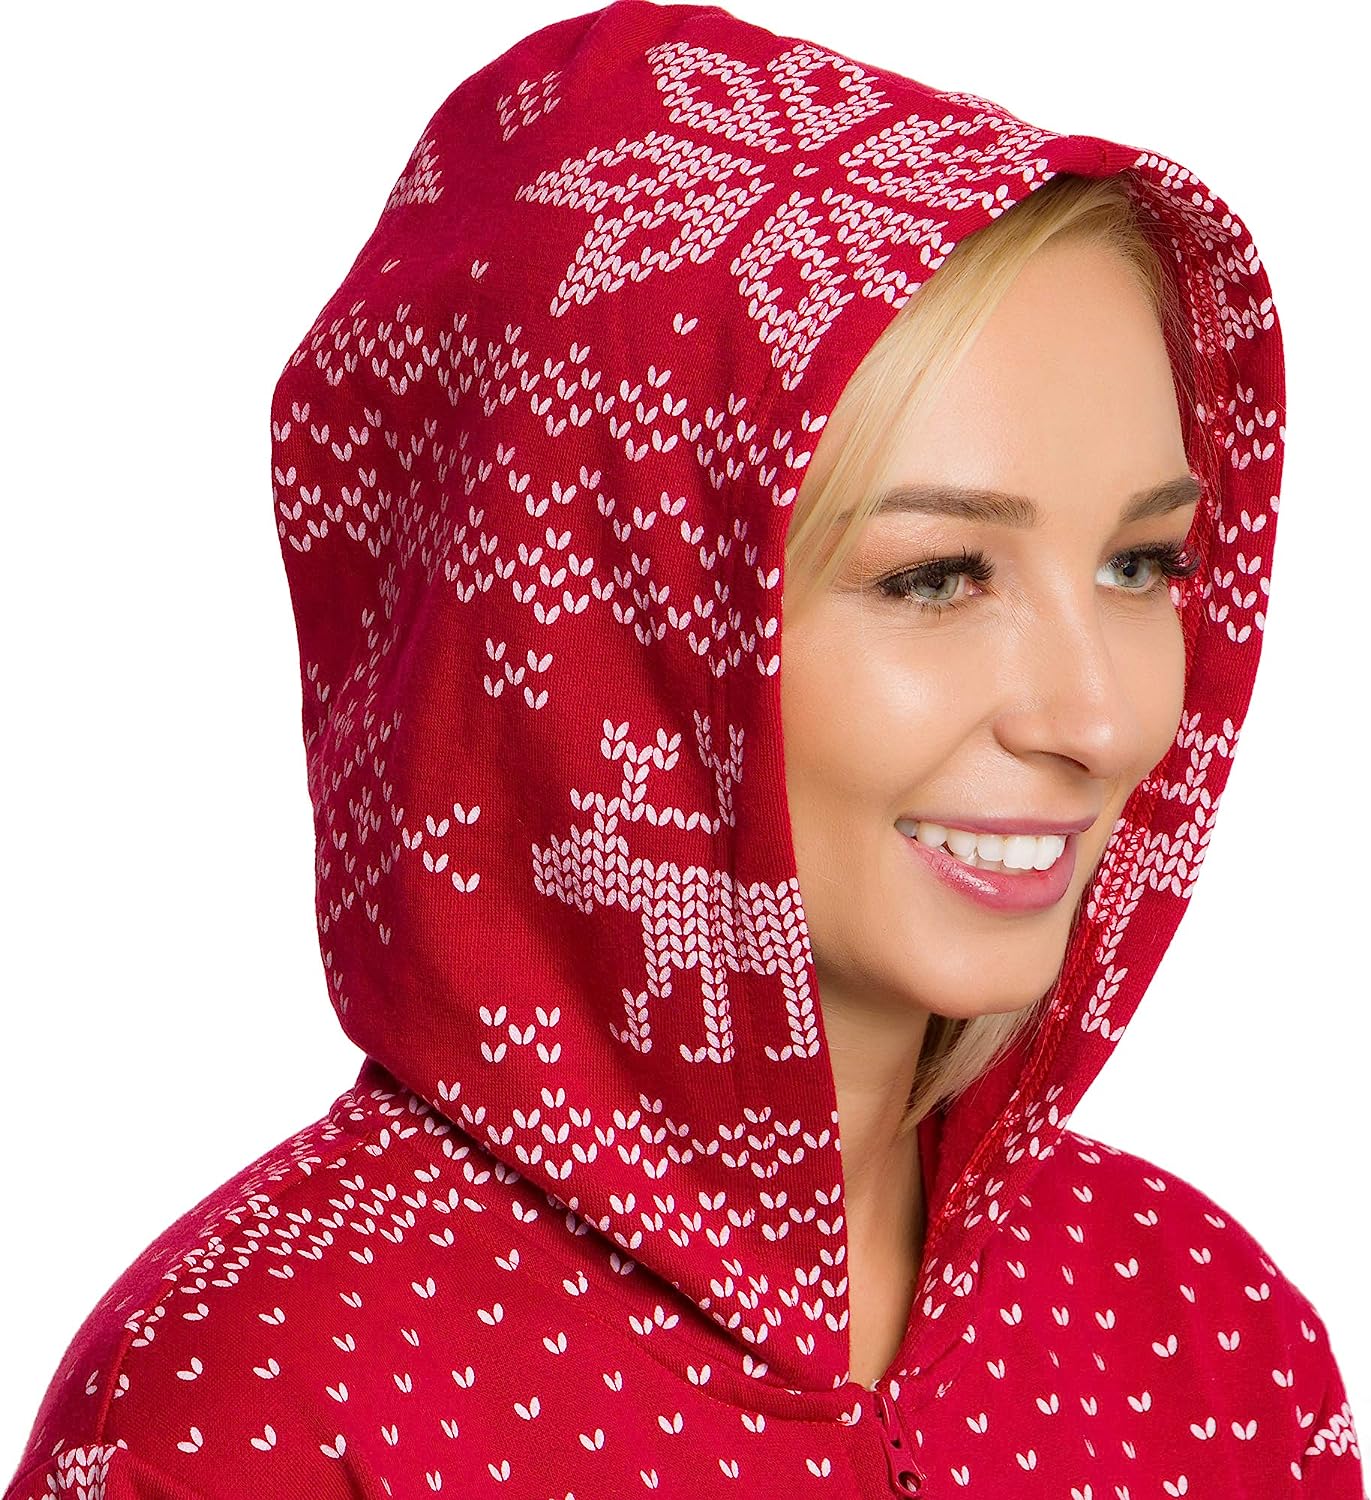 Women's Christmas snowflake cotton hooded jumpsuit